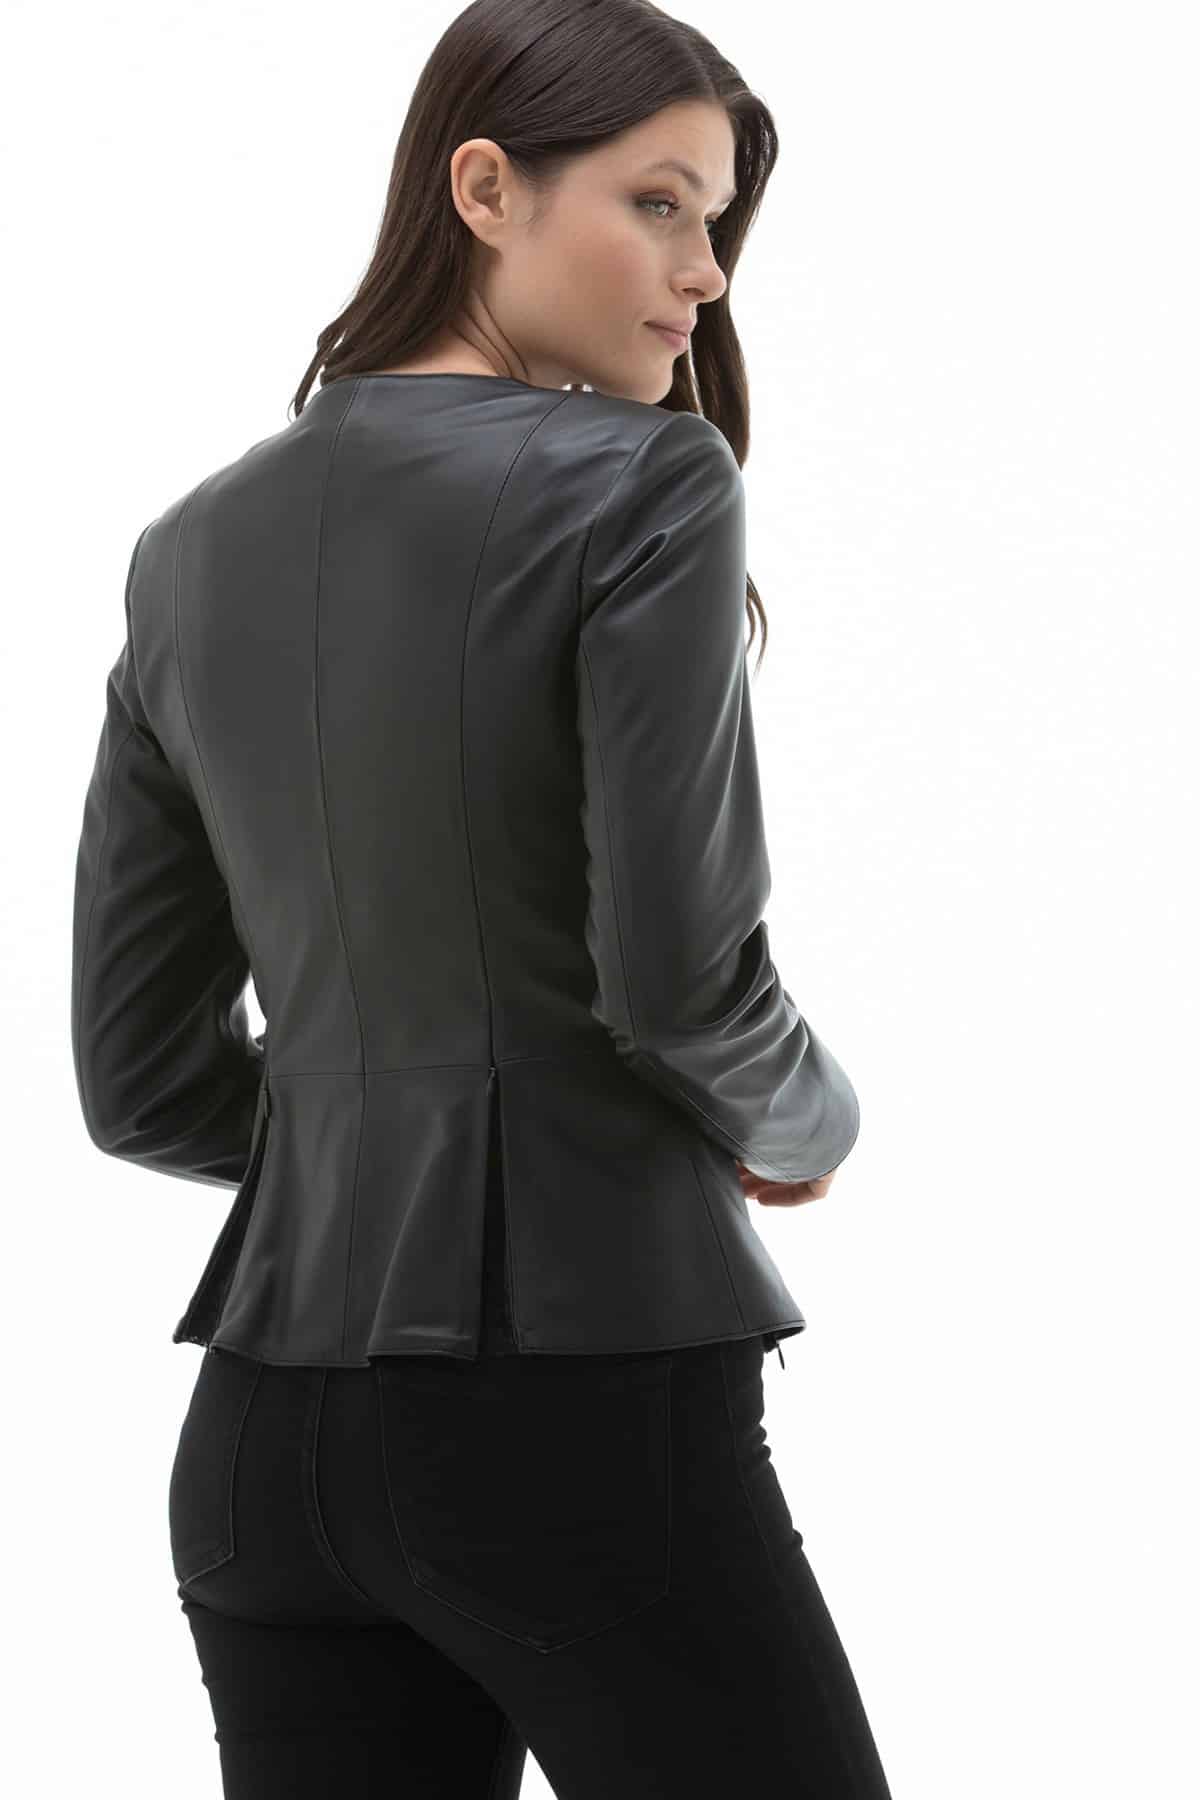 Candice Swanepoel Women's 100 % Real Black Leather Modern Fit Jacket